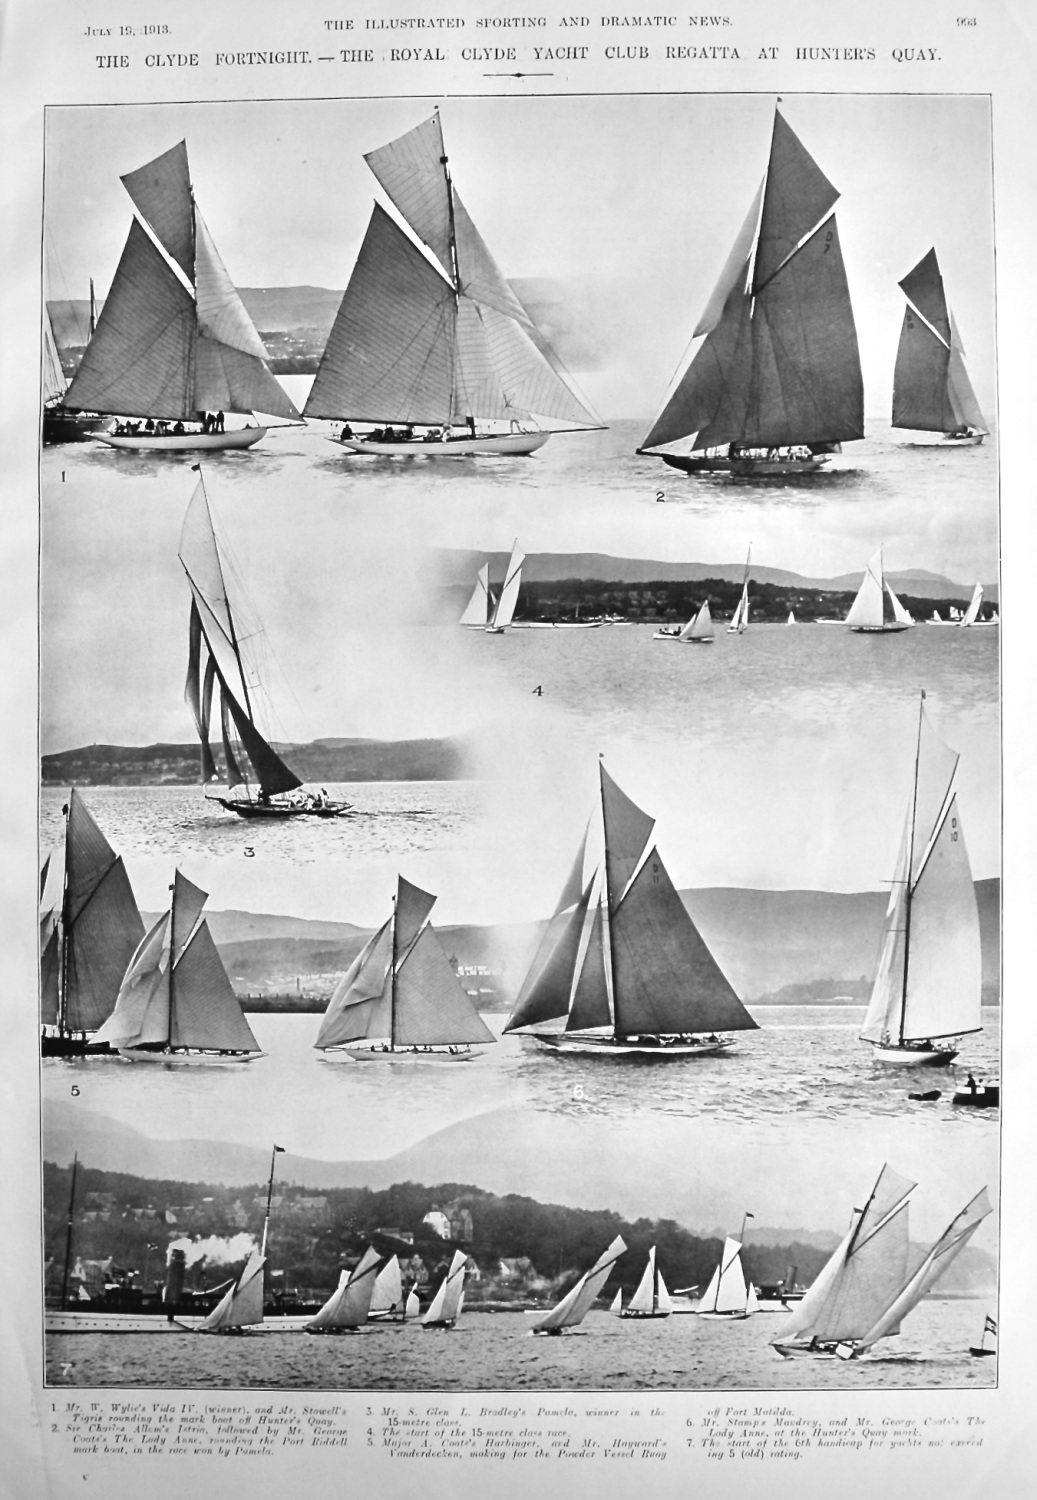 The Clyde Fortnight.- The Royal Clyde Yacht Club Regatta at Hunter's Quay. 